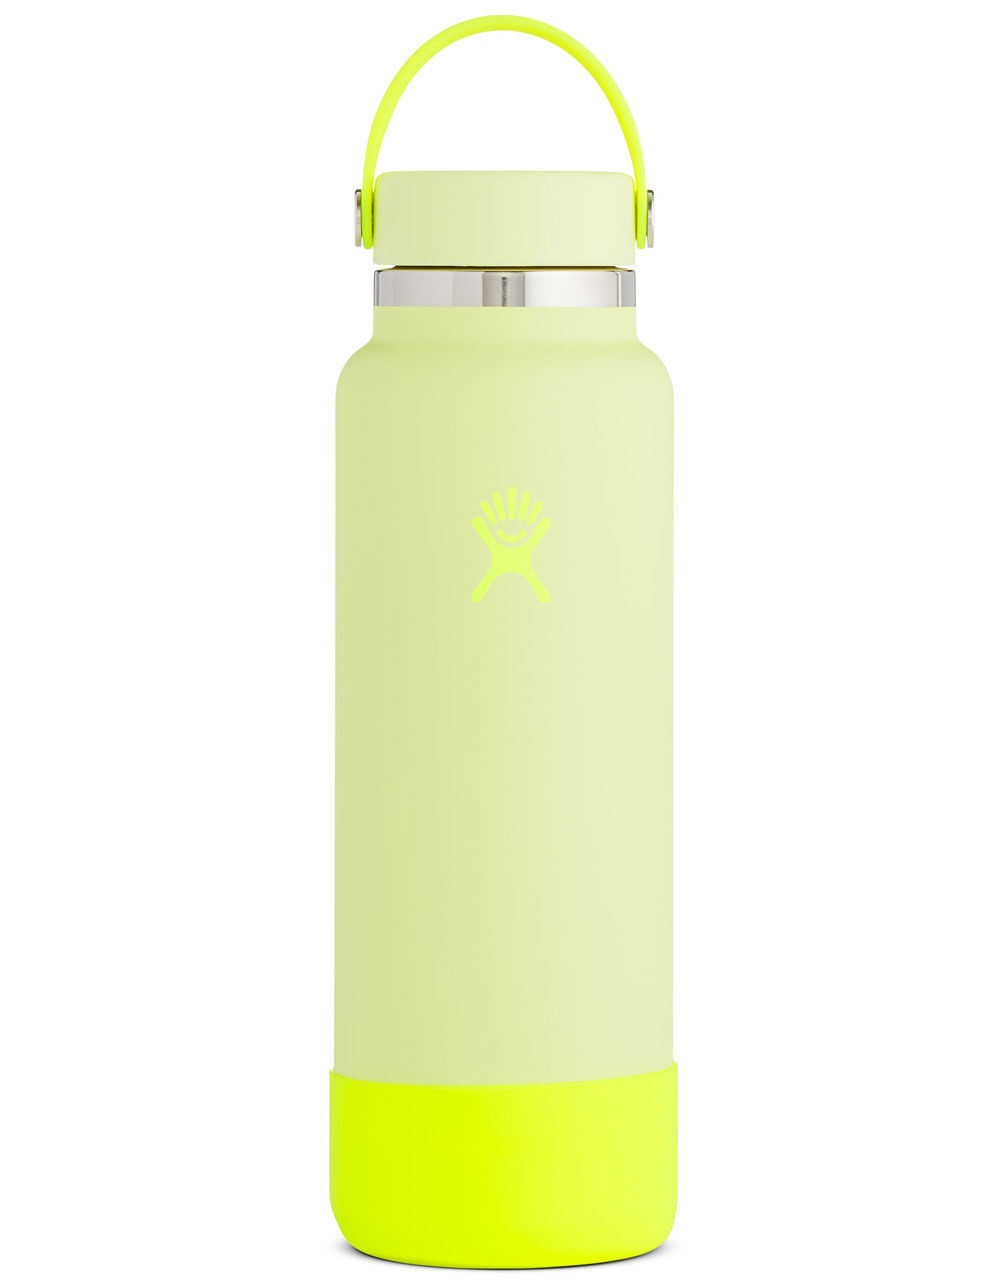 Hydro Flask in beige white and yellow special edition #drinking